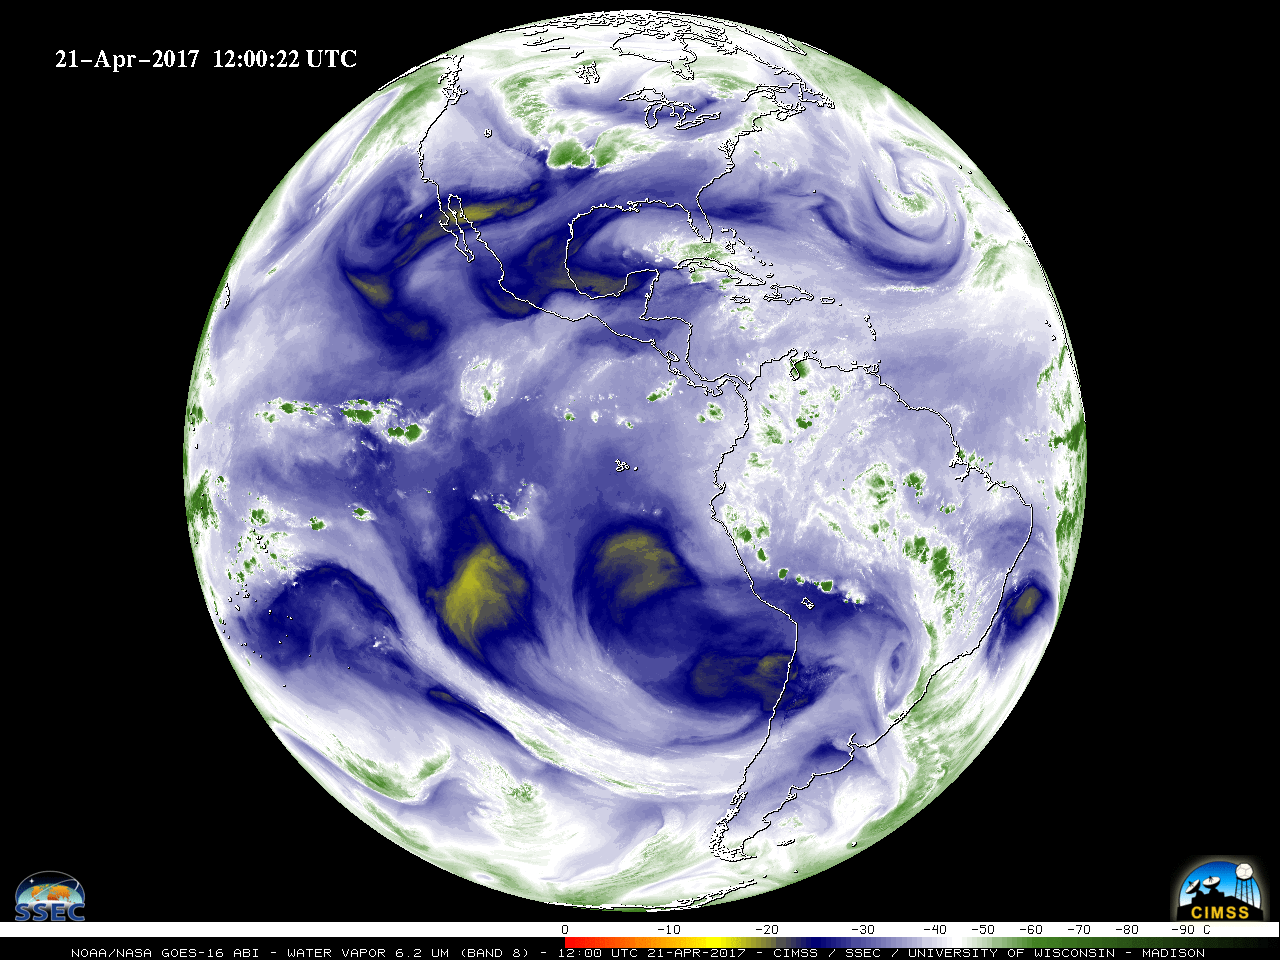 GOES-16 Upper-Level Water Vapor (6.2 µm) images [click to play animation]